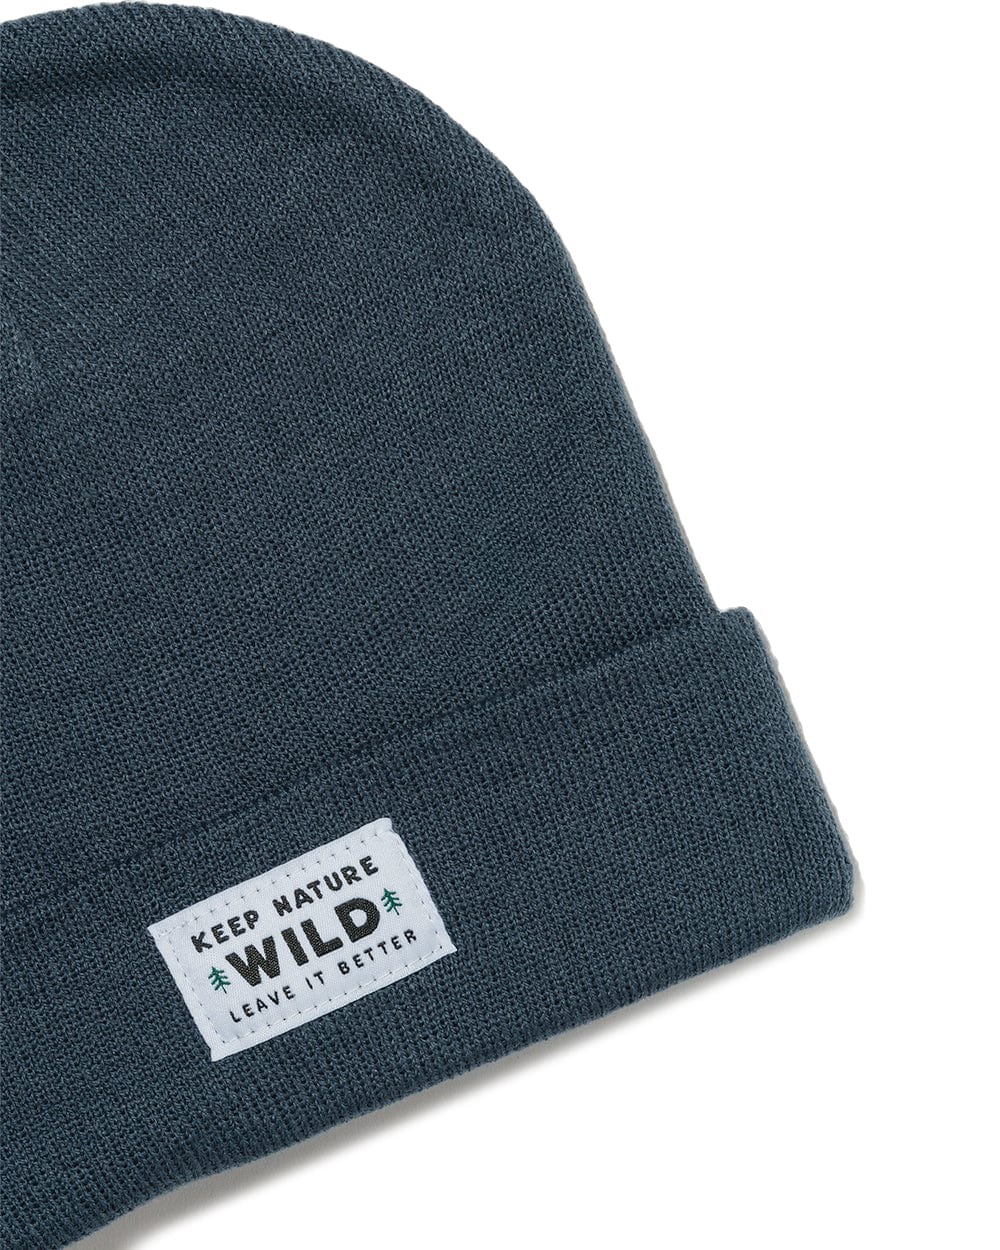 Sale Duo Hat Beanie for Cold Weather Dark Grey (1268)